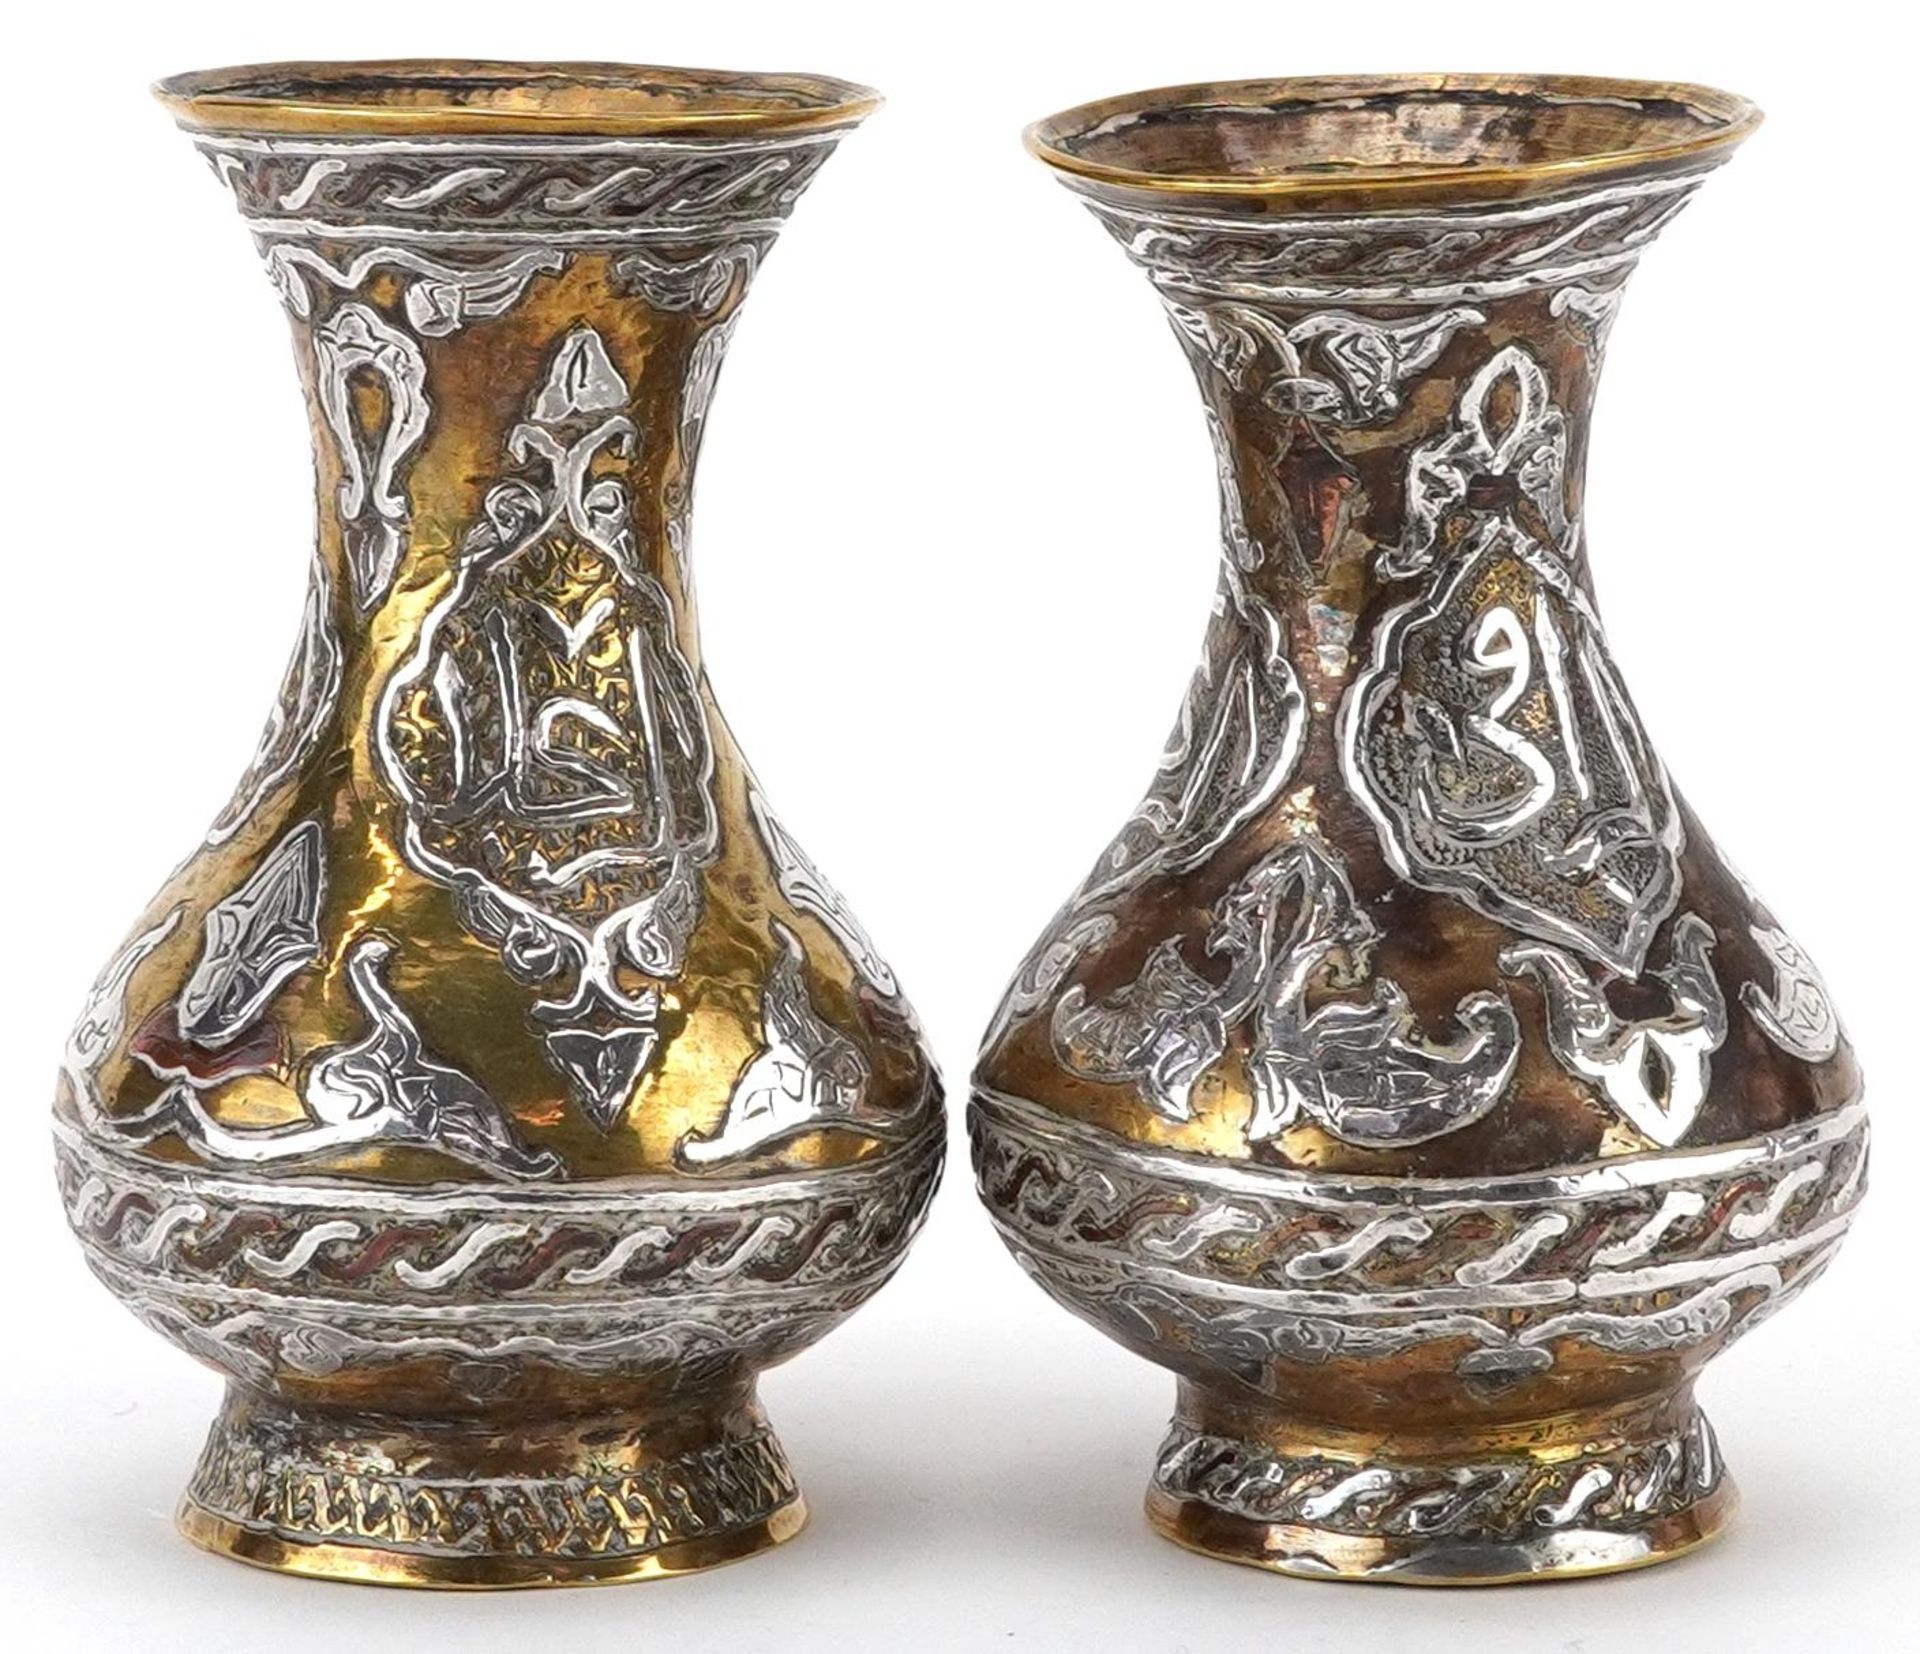 Pair of Islamic brass vases with silver foliate inlay, each 10cm high - Image 2 of 6